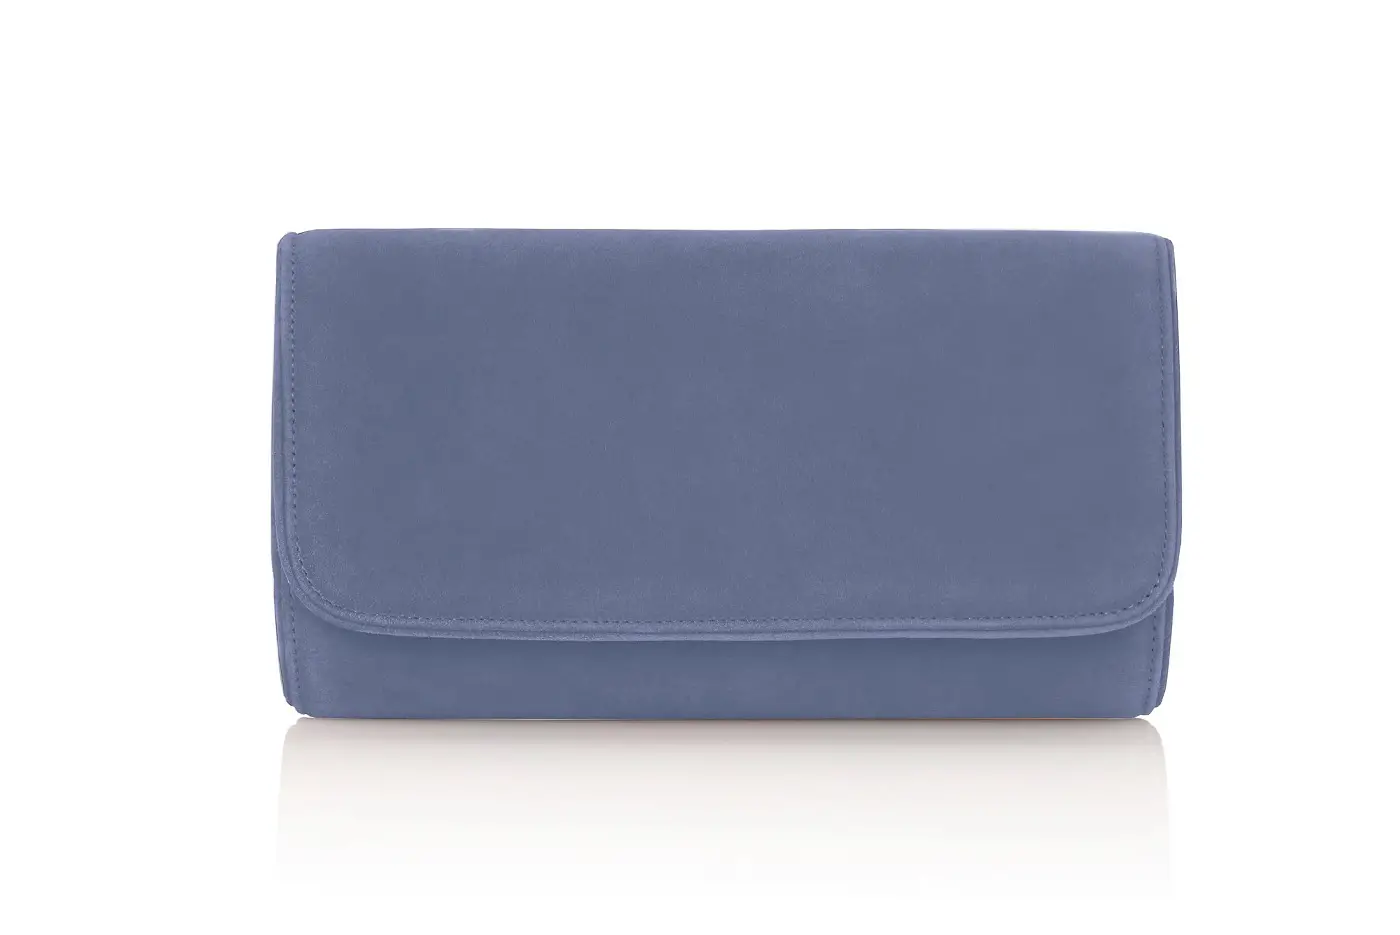 The Duchess of Cambridge carried Emmy London Nathasa Riviera Clutch